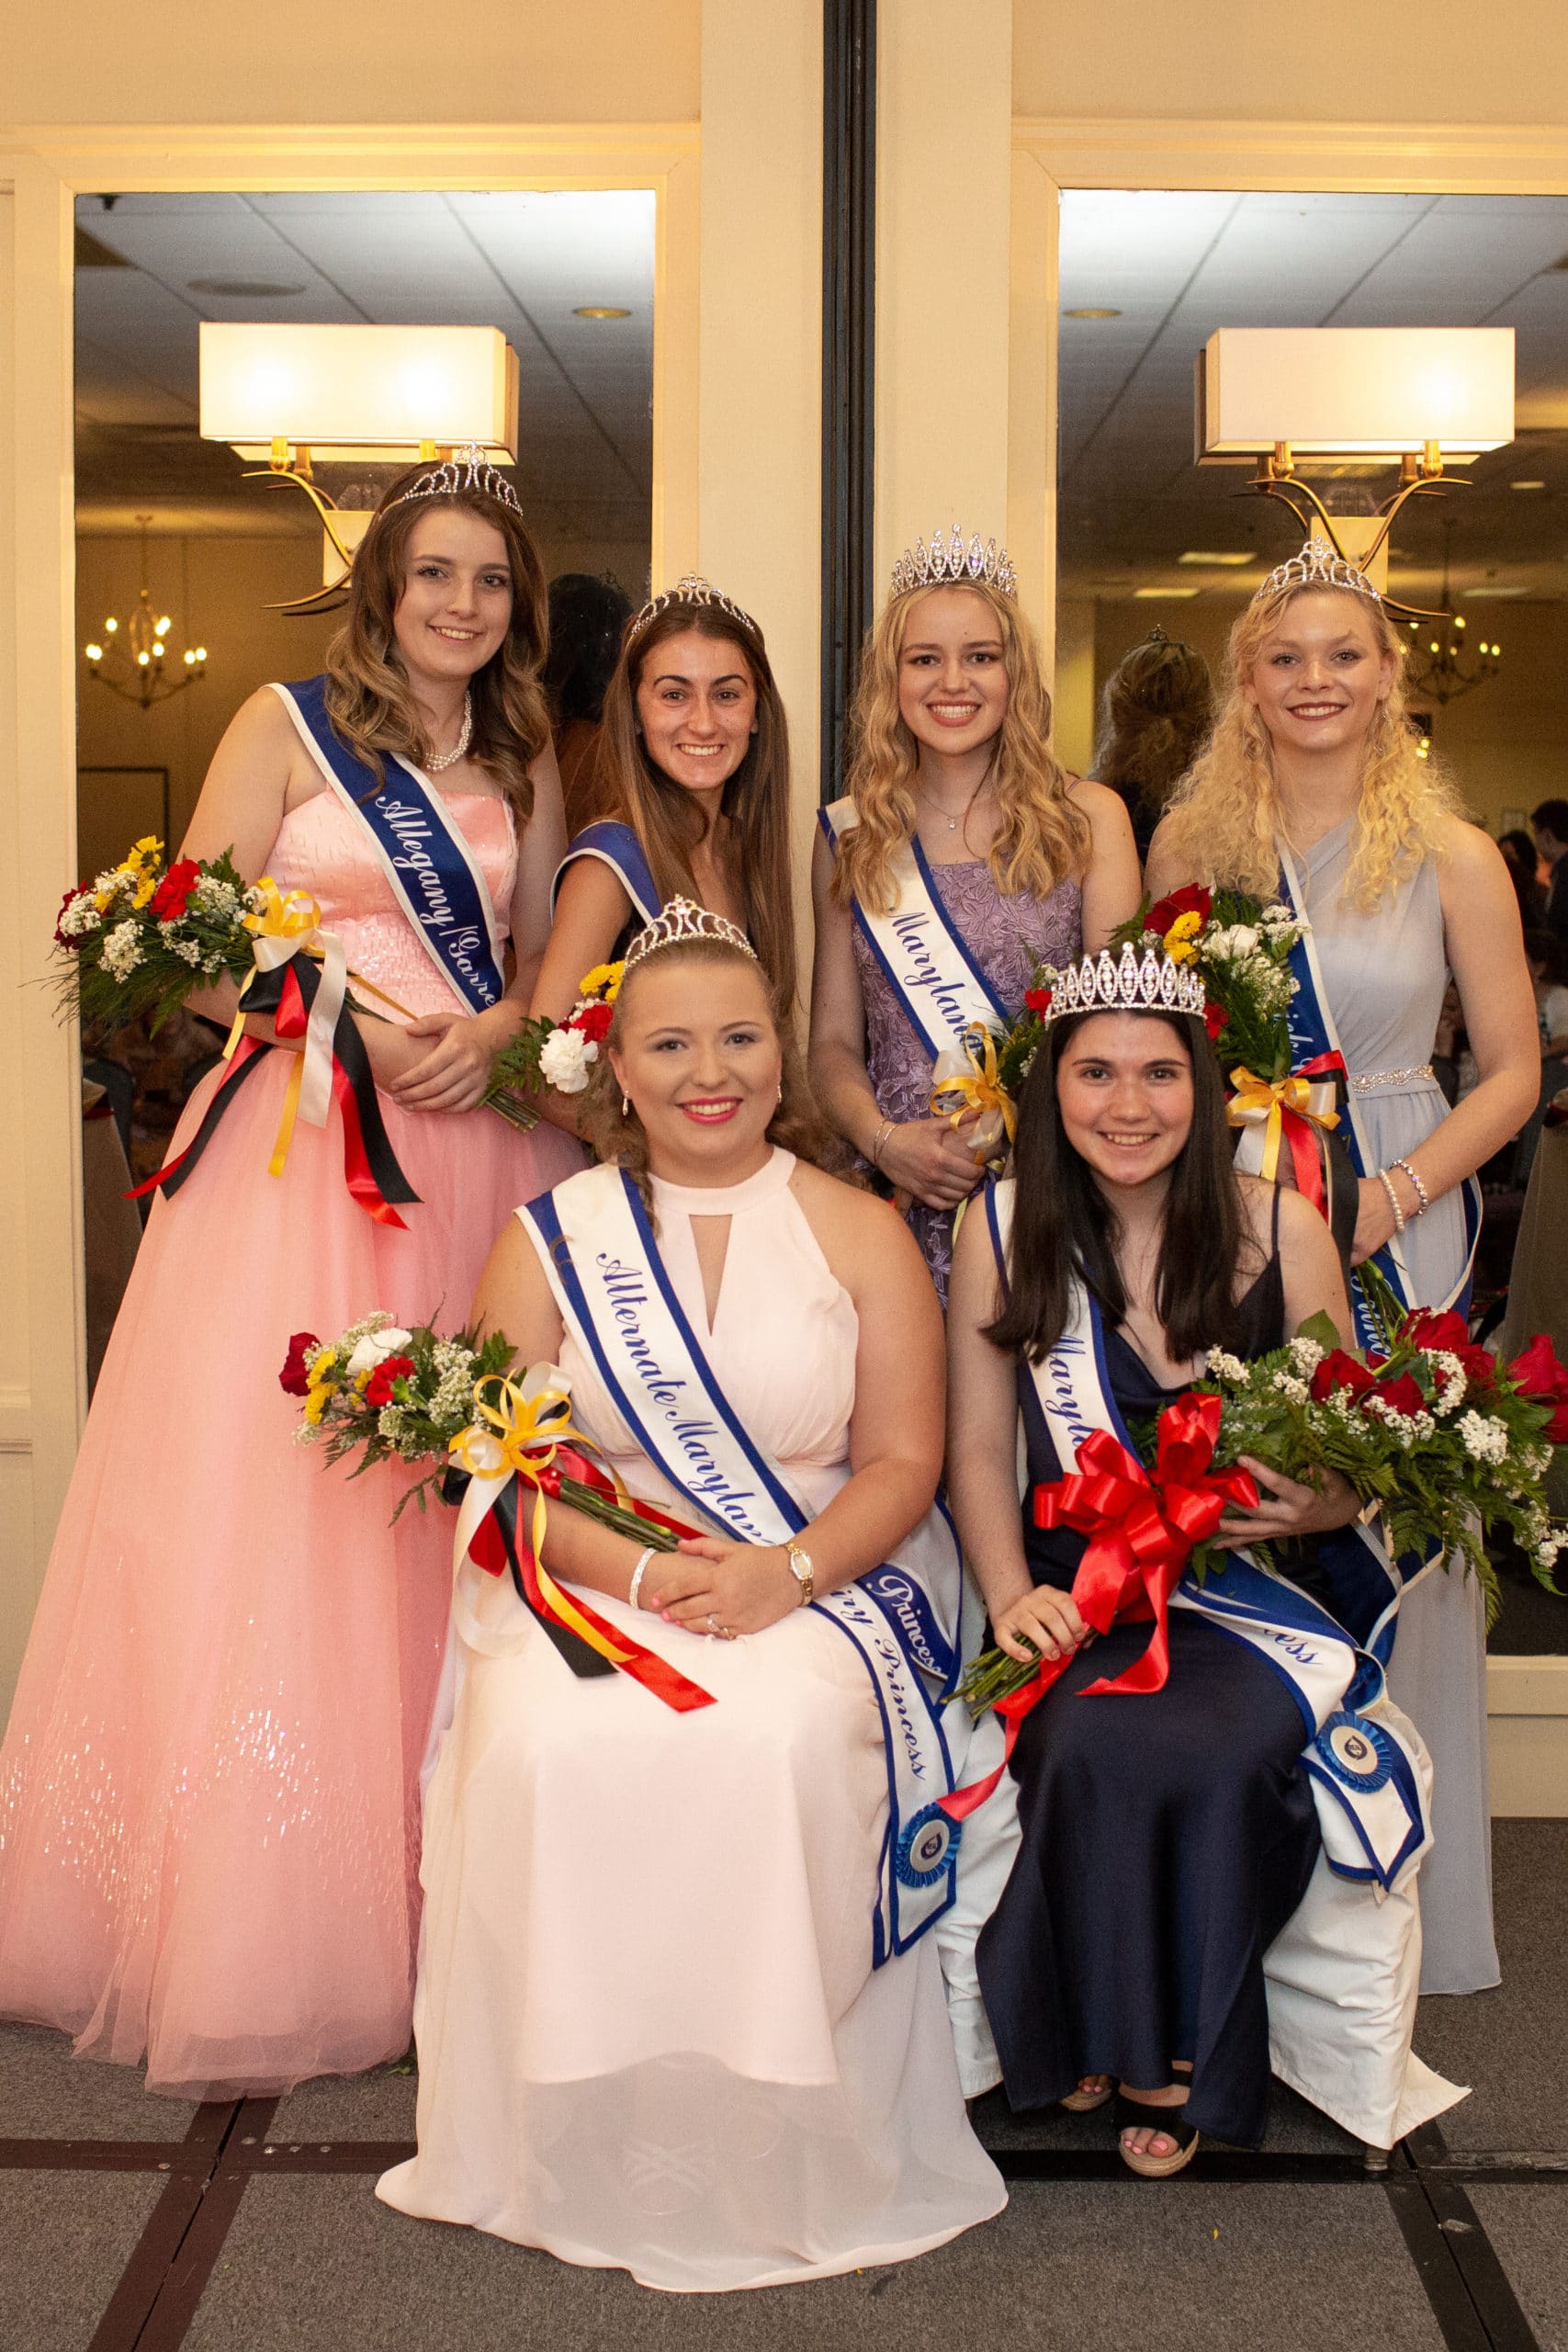 New Maryland State Dairy Princess, Alternate Selected to Promote Dairy at Grassroots Level